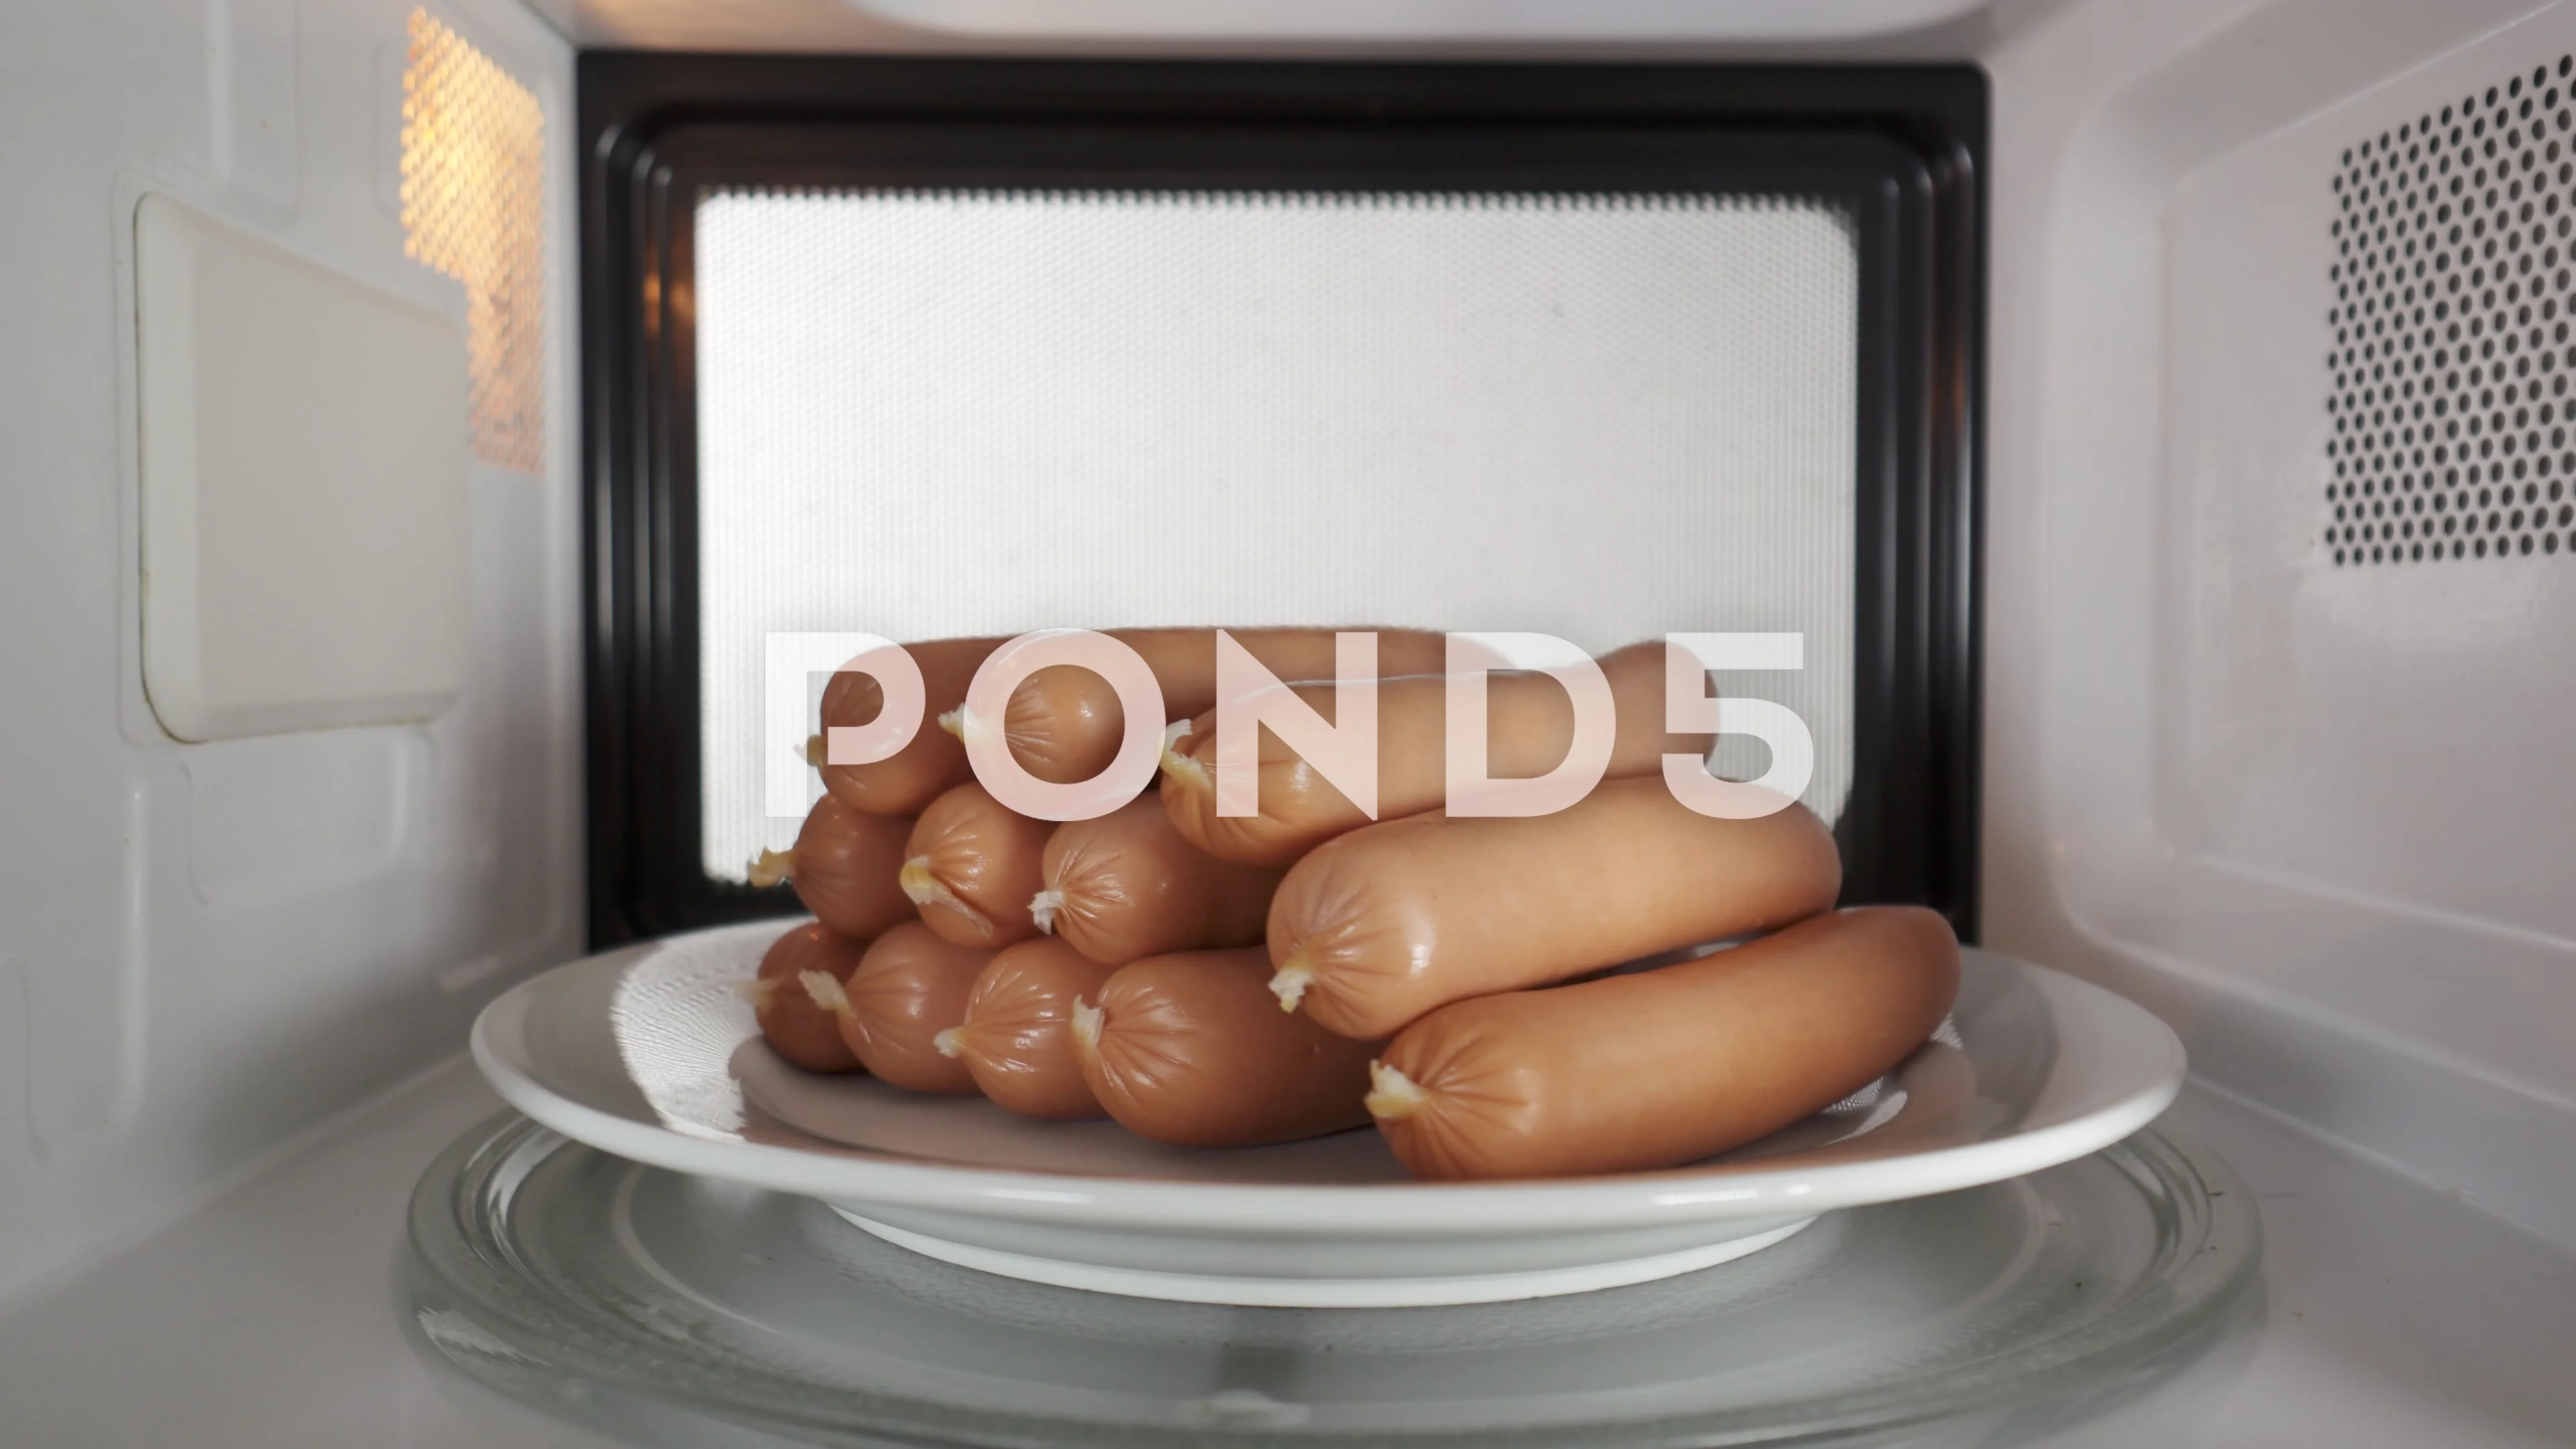 How do you cook ground sausage in the microwave?